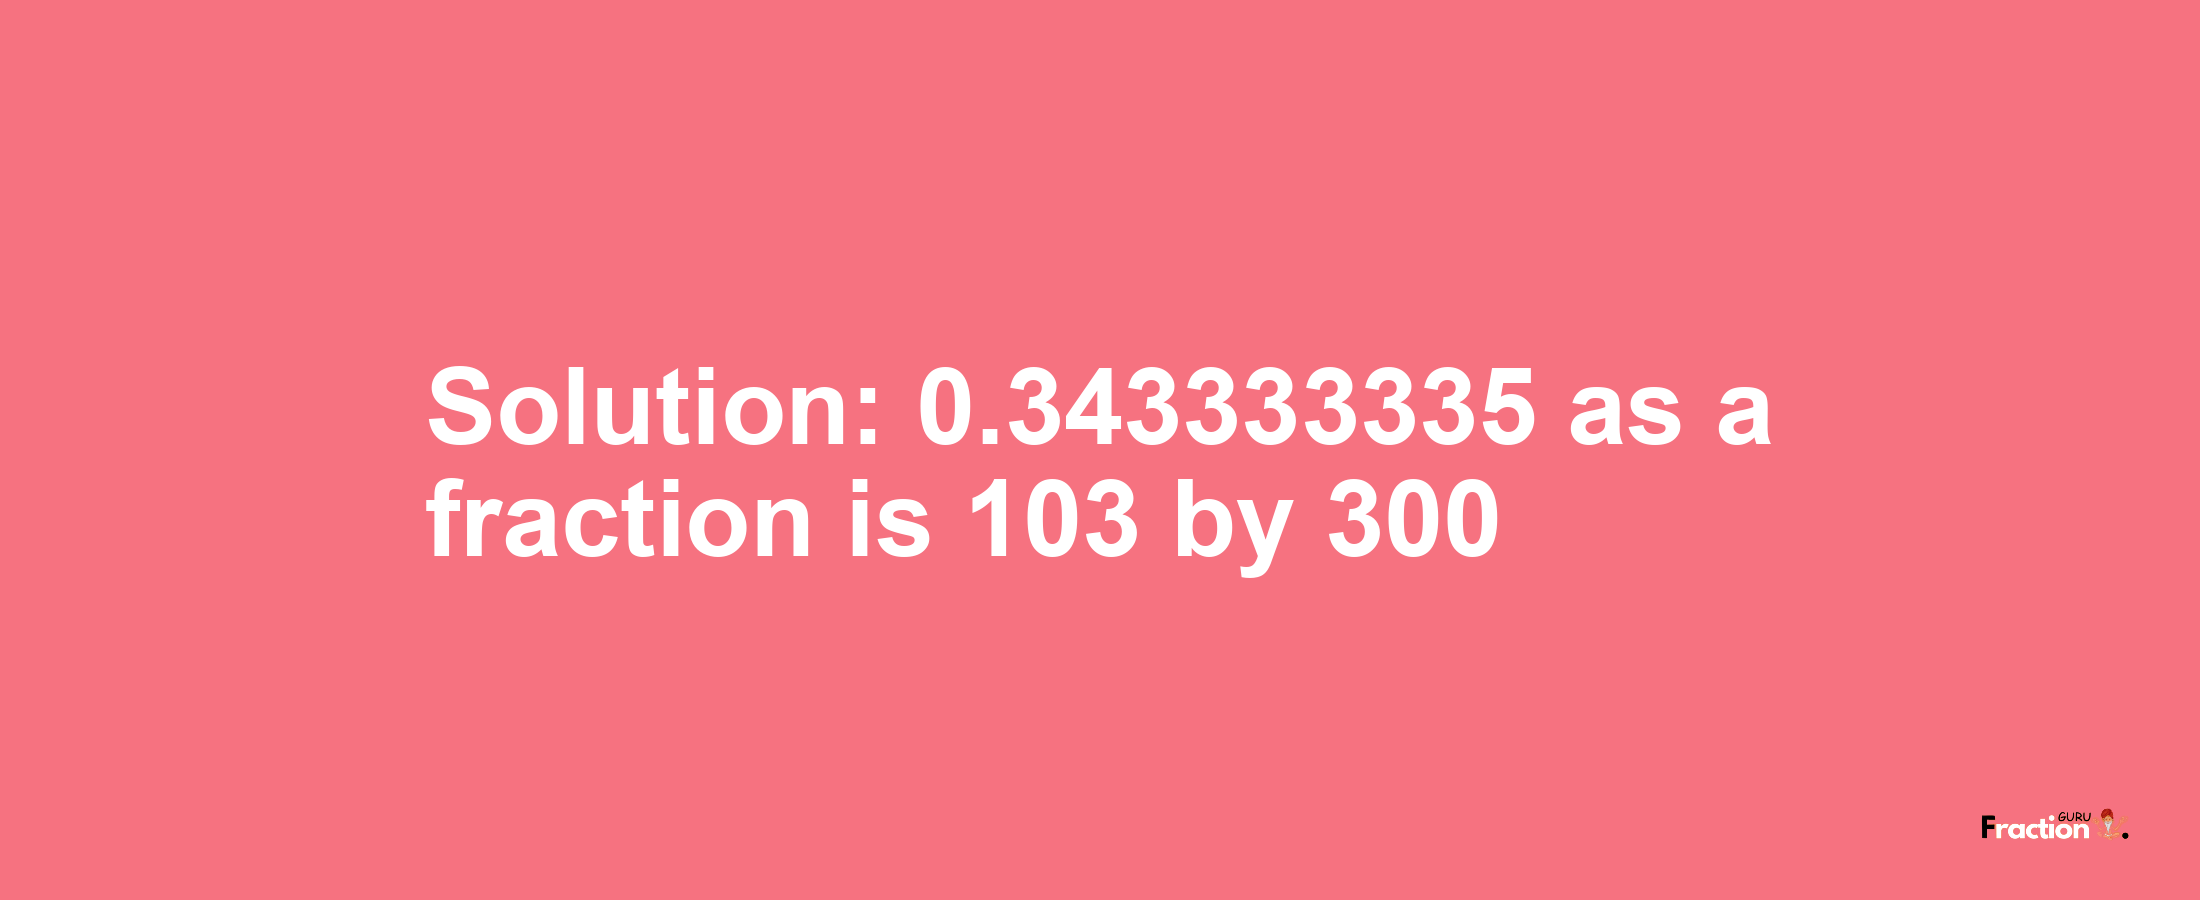 Solution:0.343333335 as a fraction is 103/300